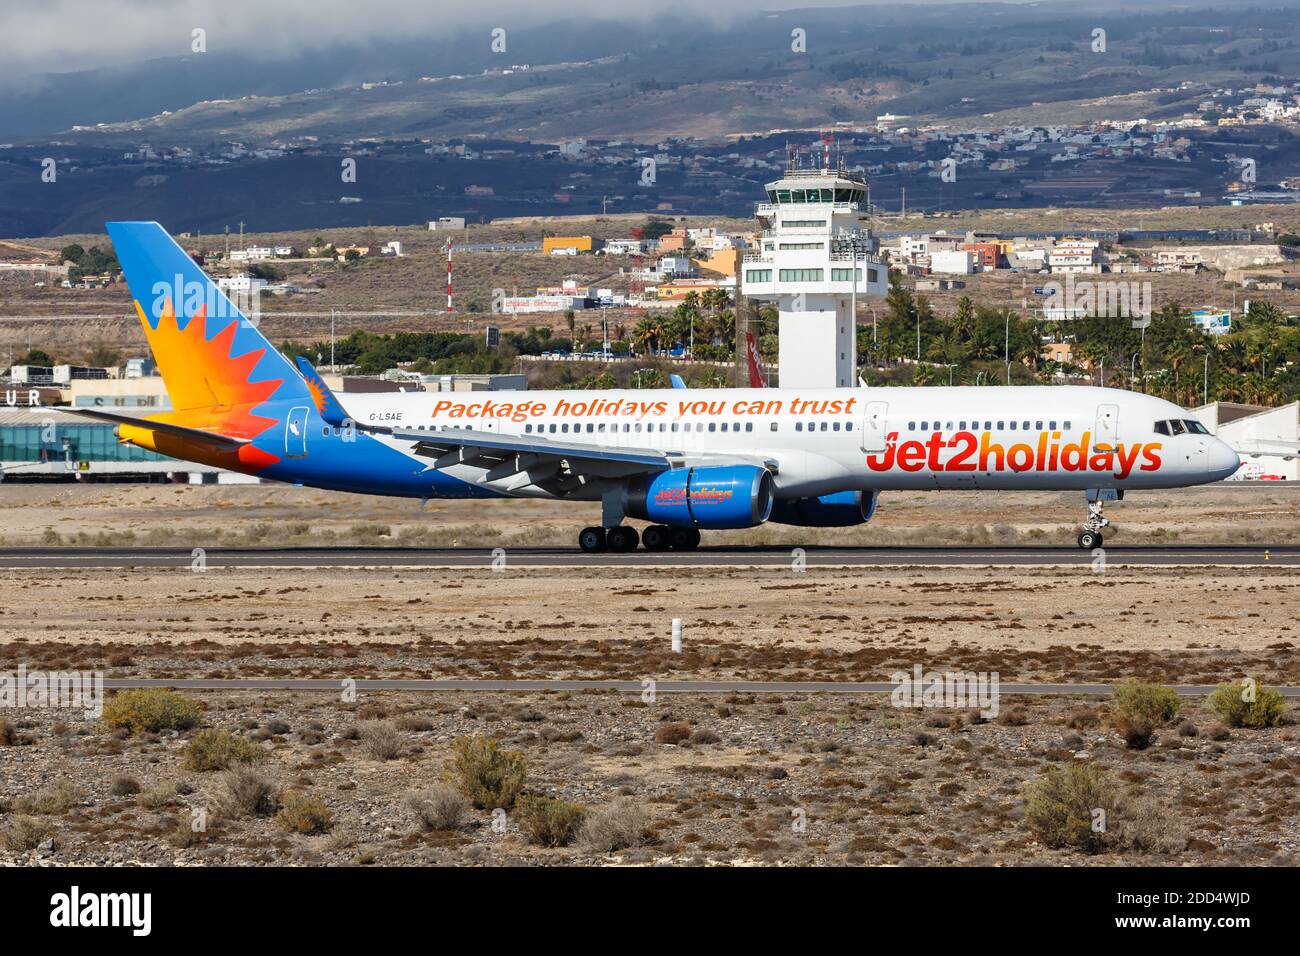 Tenerife, Spain - November 23, 2019: Jet2 Boeing 757-200 airplane at Tenerife South Airport in Spain. Boeing is an American aircraft manufacturer head Stock Photo